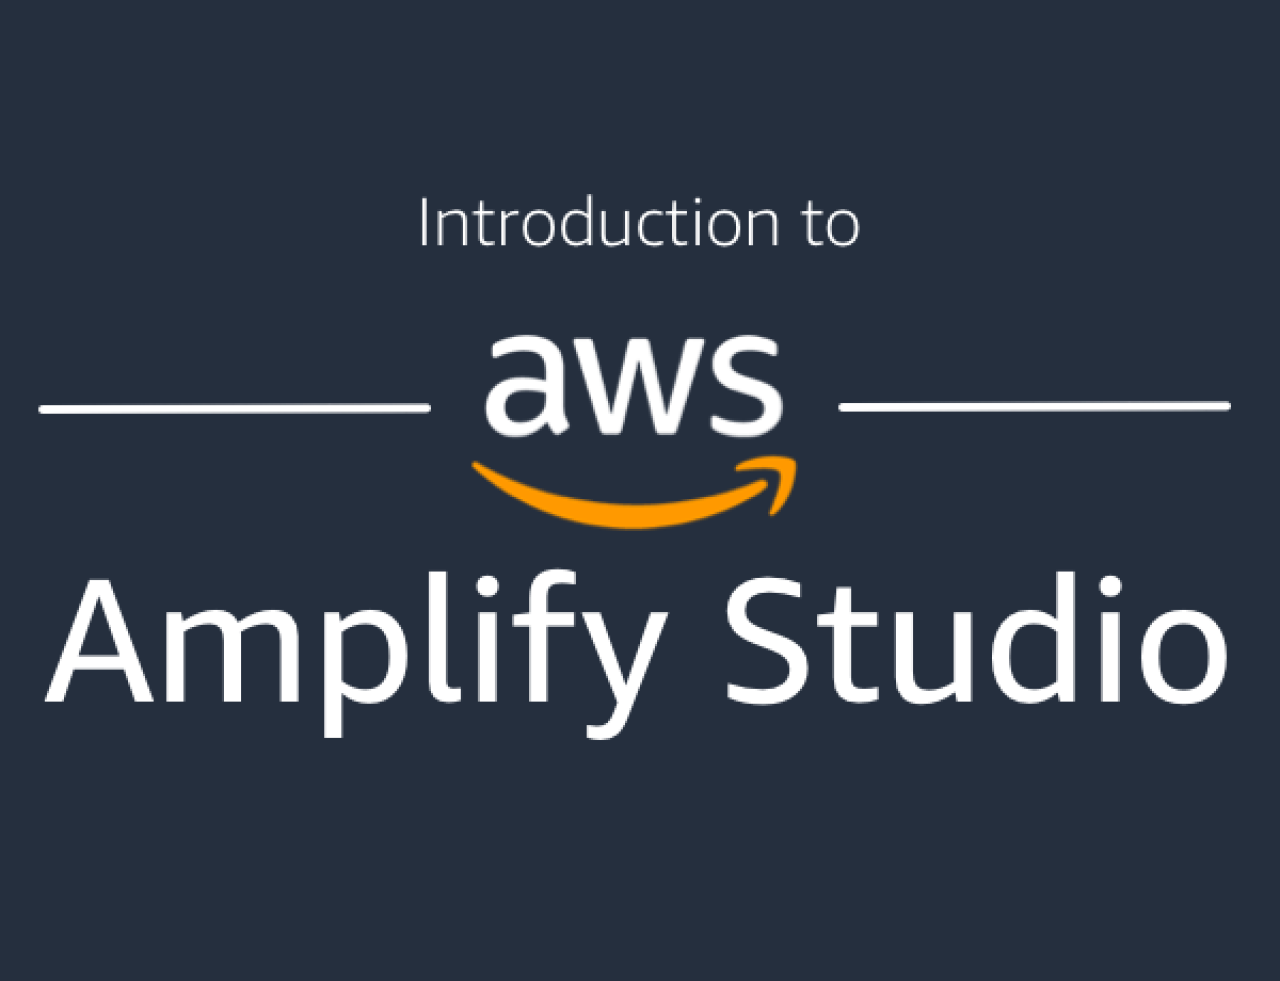 aws introduction to amplify studio.